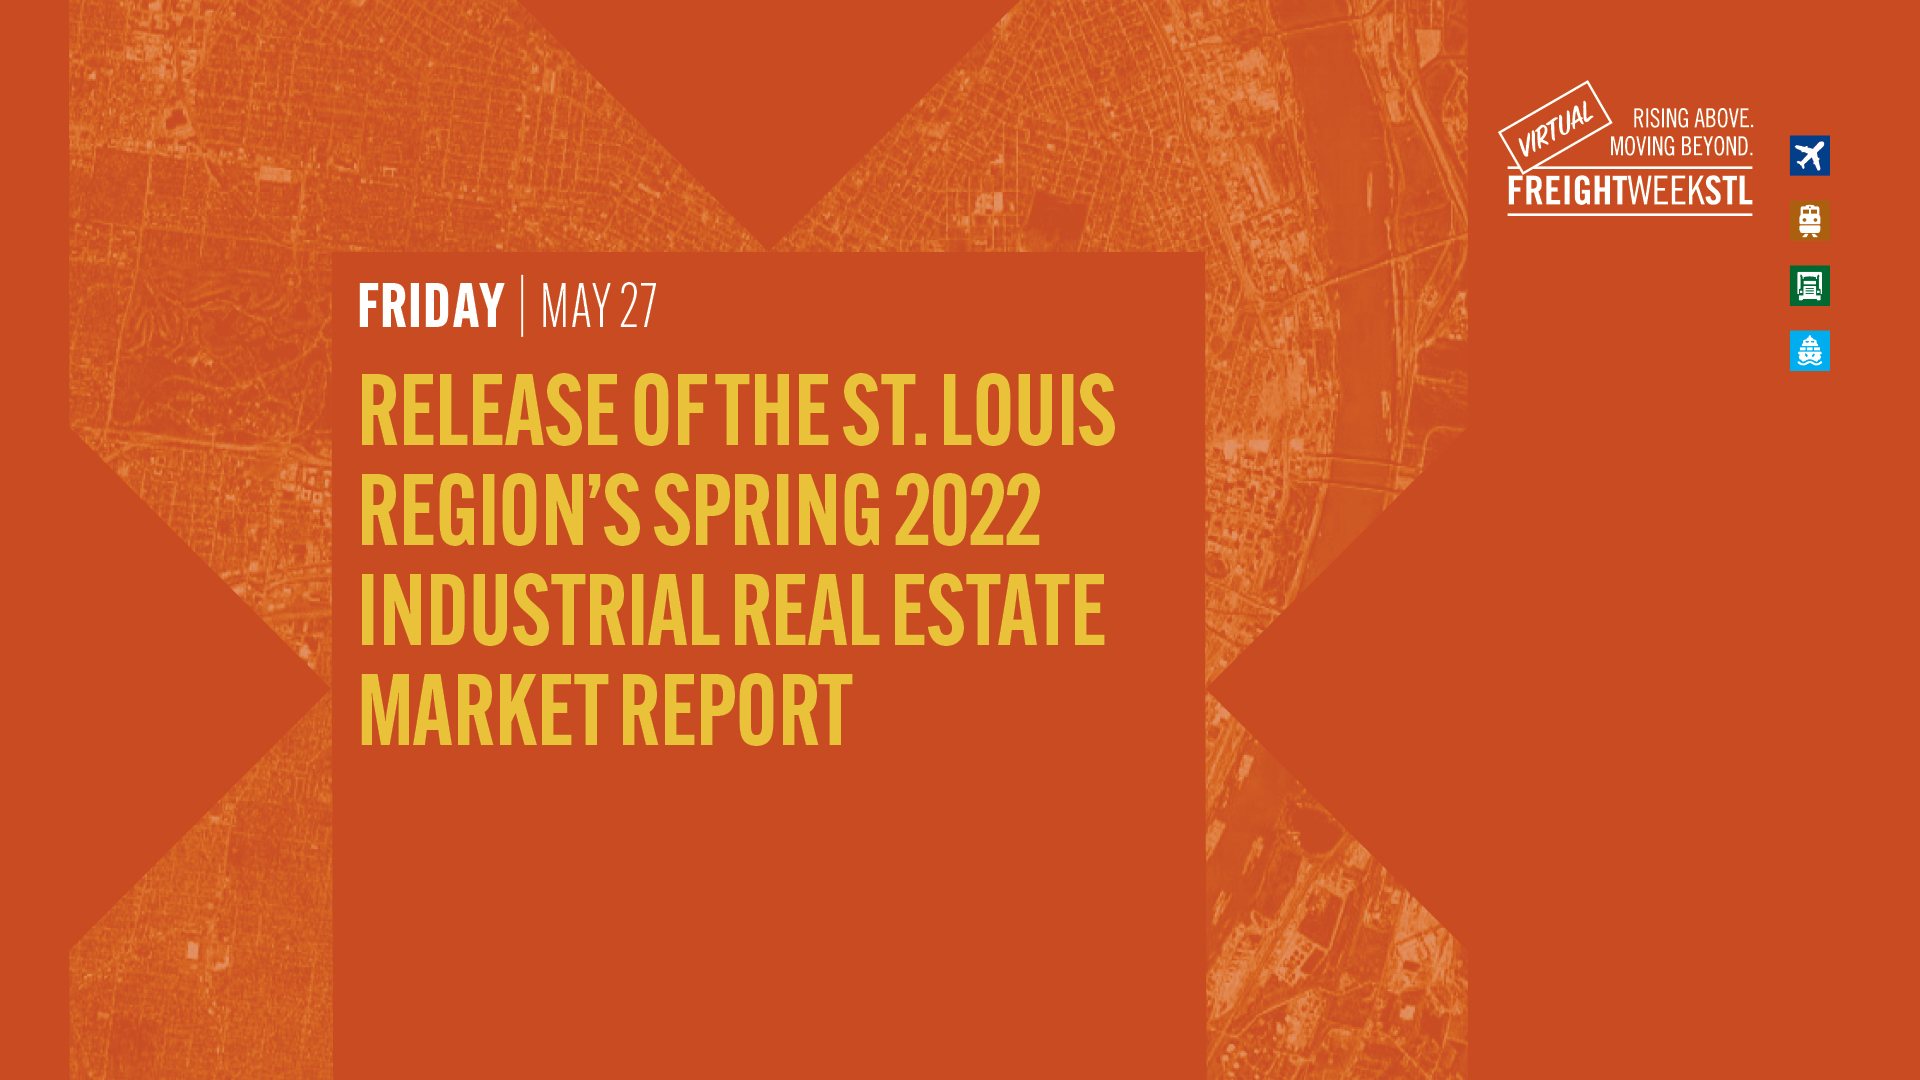 Friday May 27 Release of the St. Louis Region's Spring 2022 Industrial Real Estate Market Report